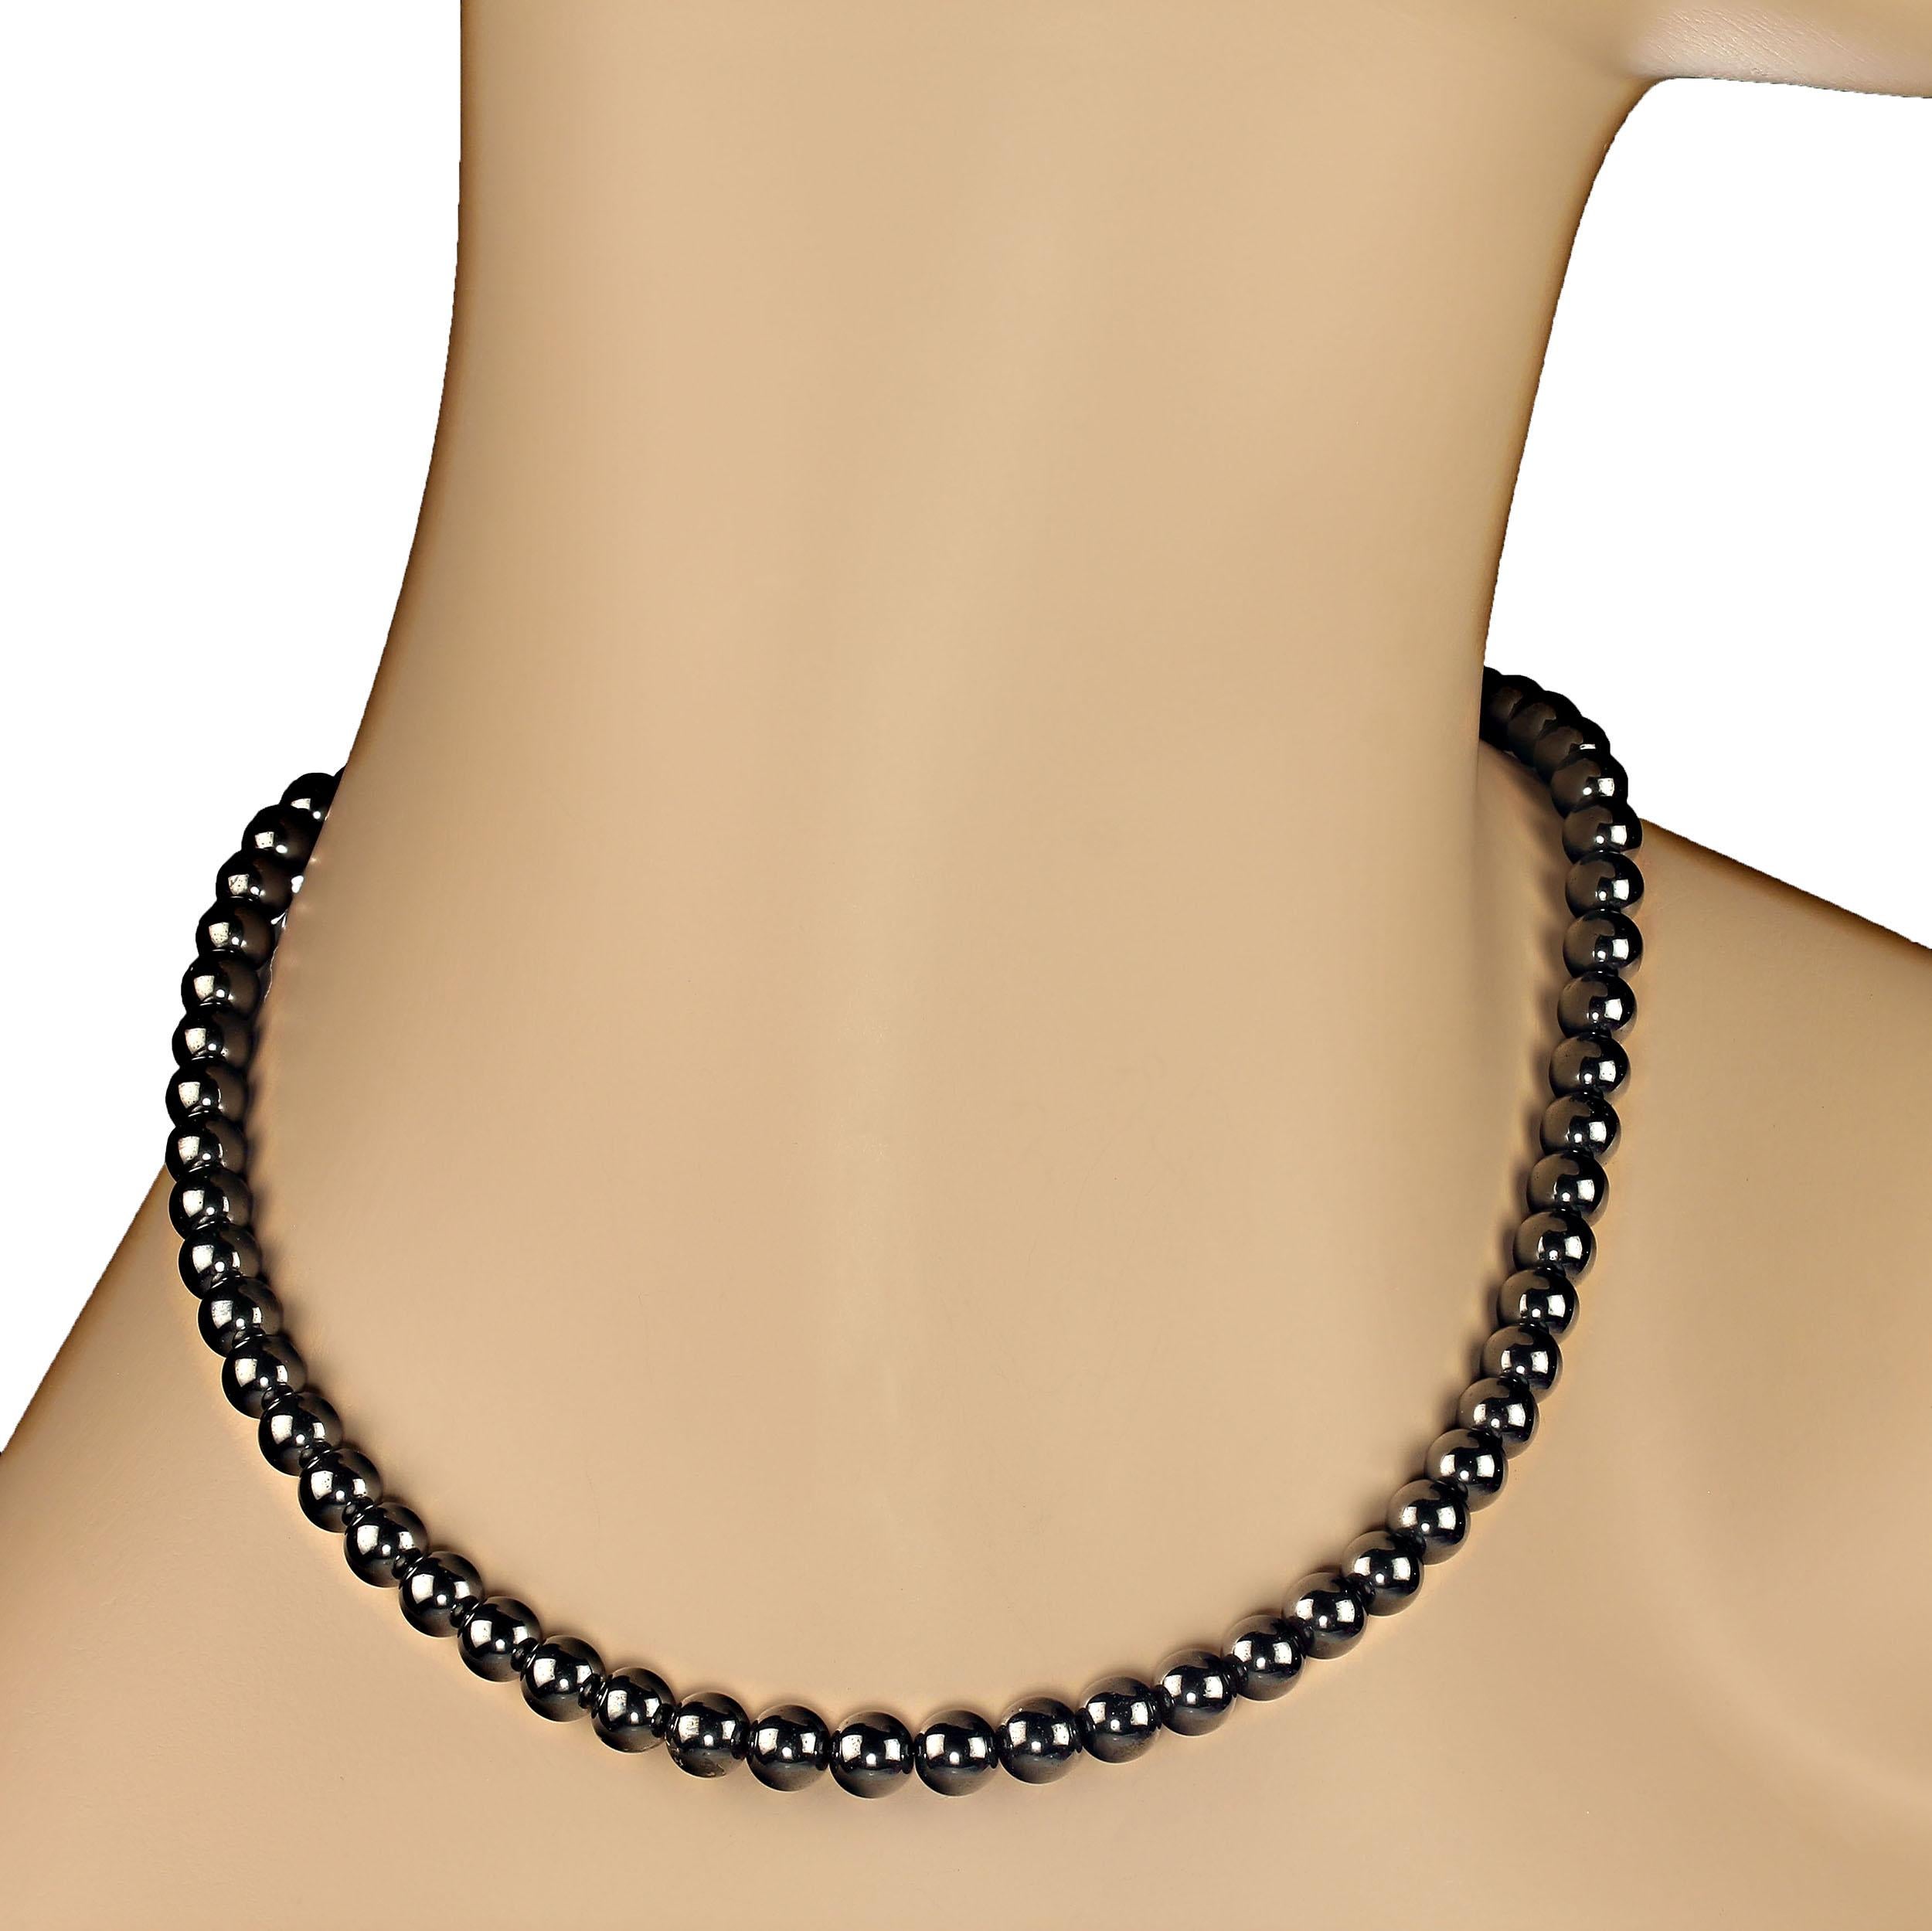 AJD 18 Inch Hematite Necklace with Silver Clasp    Perfect Gift! For Sale